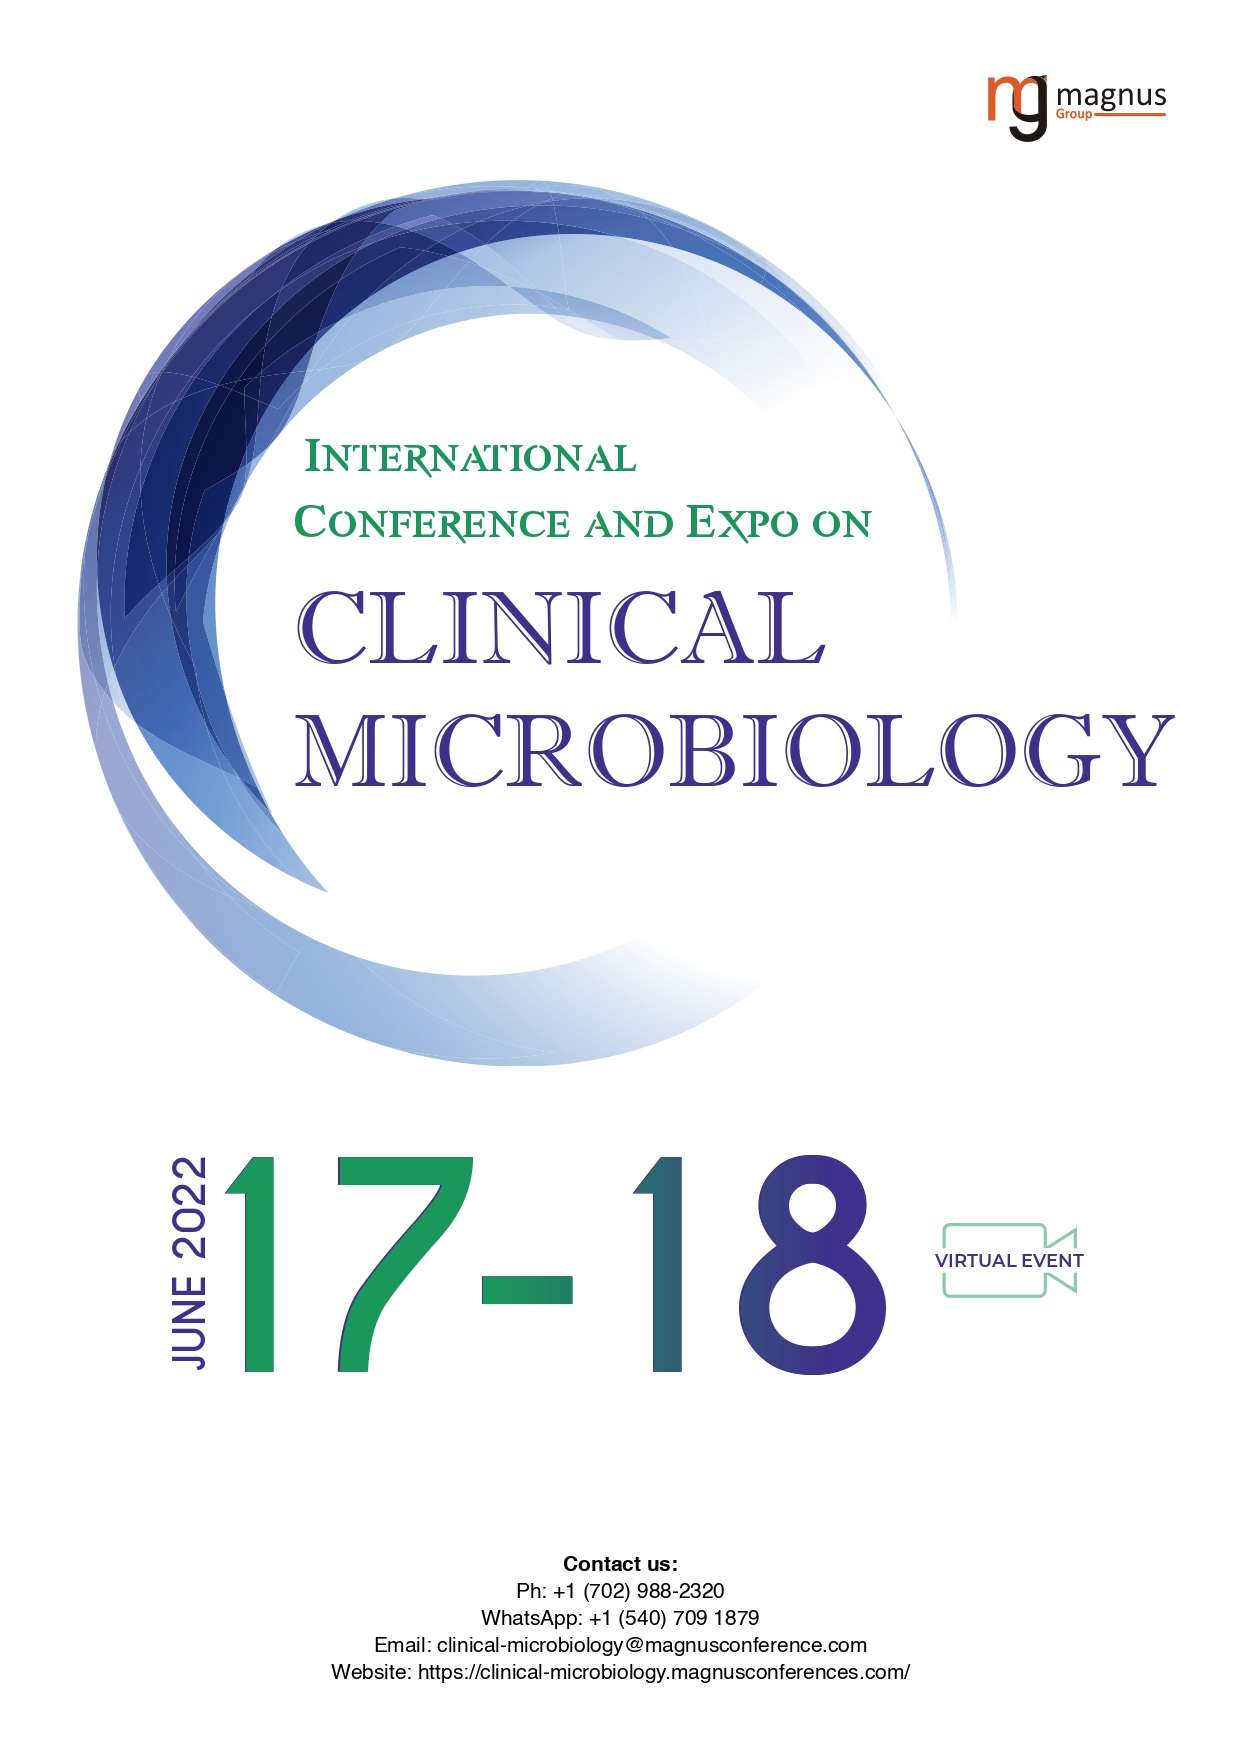 International Conference and Expo on Clinical Microbiology | Online Event Book